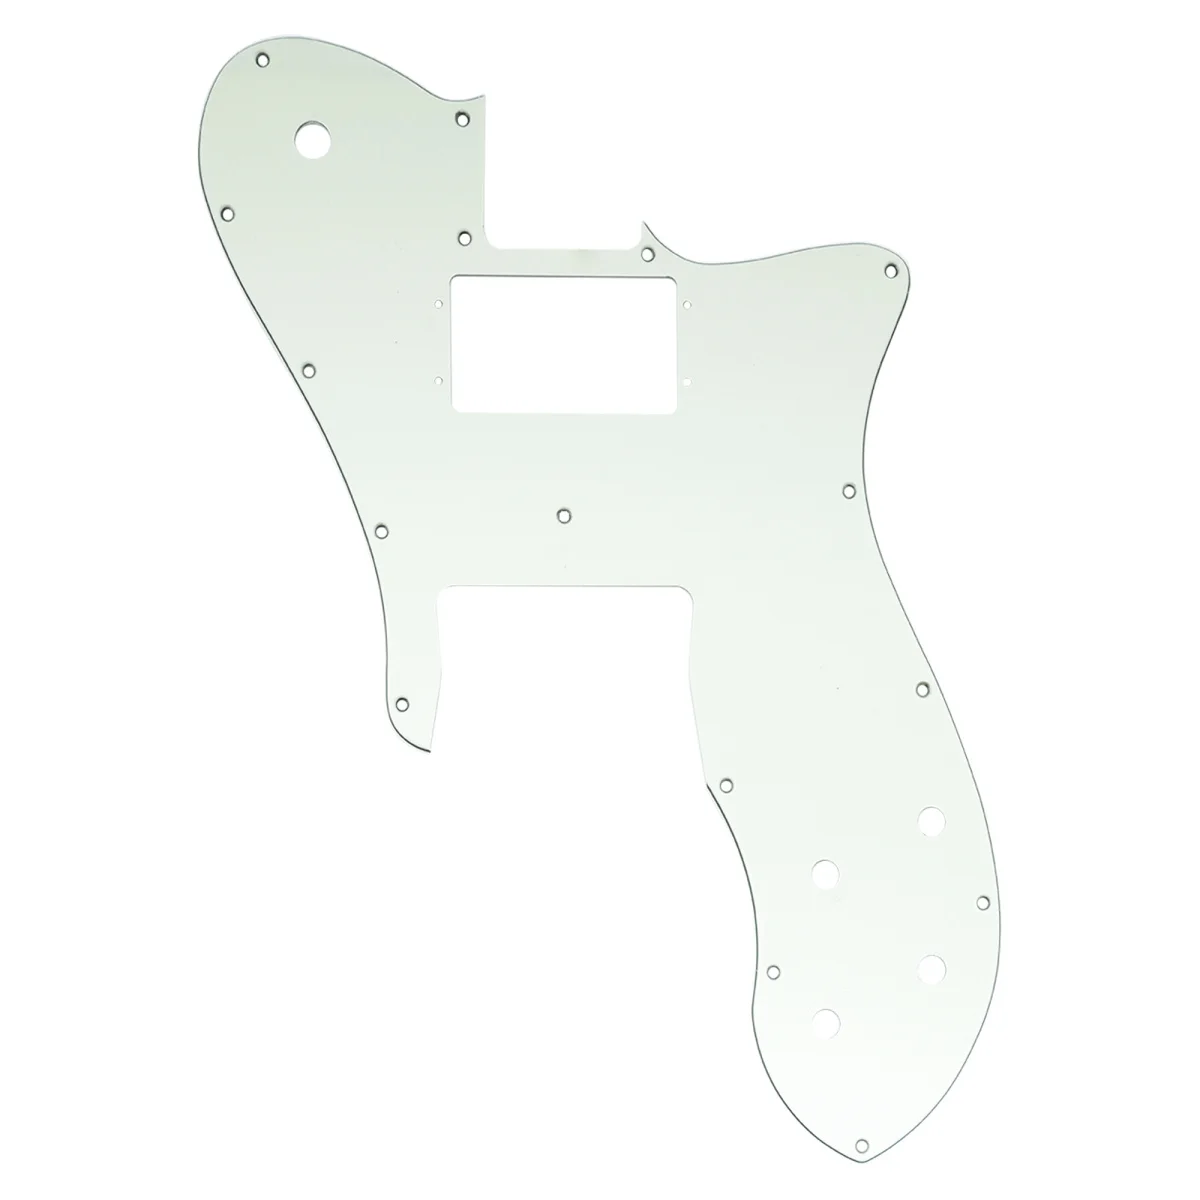 

Musiclily Pro 16 Holes Wide Range Humbucker Pickguard For USA/Mexico Fender 72 Tele Custom Style Guitar, 3ply Aged White